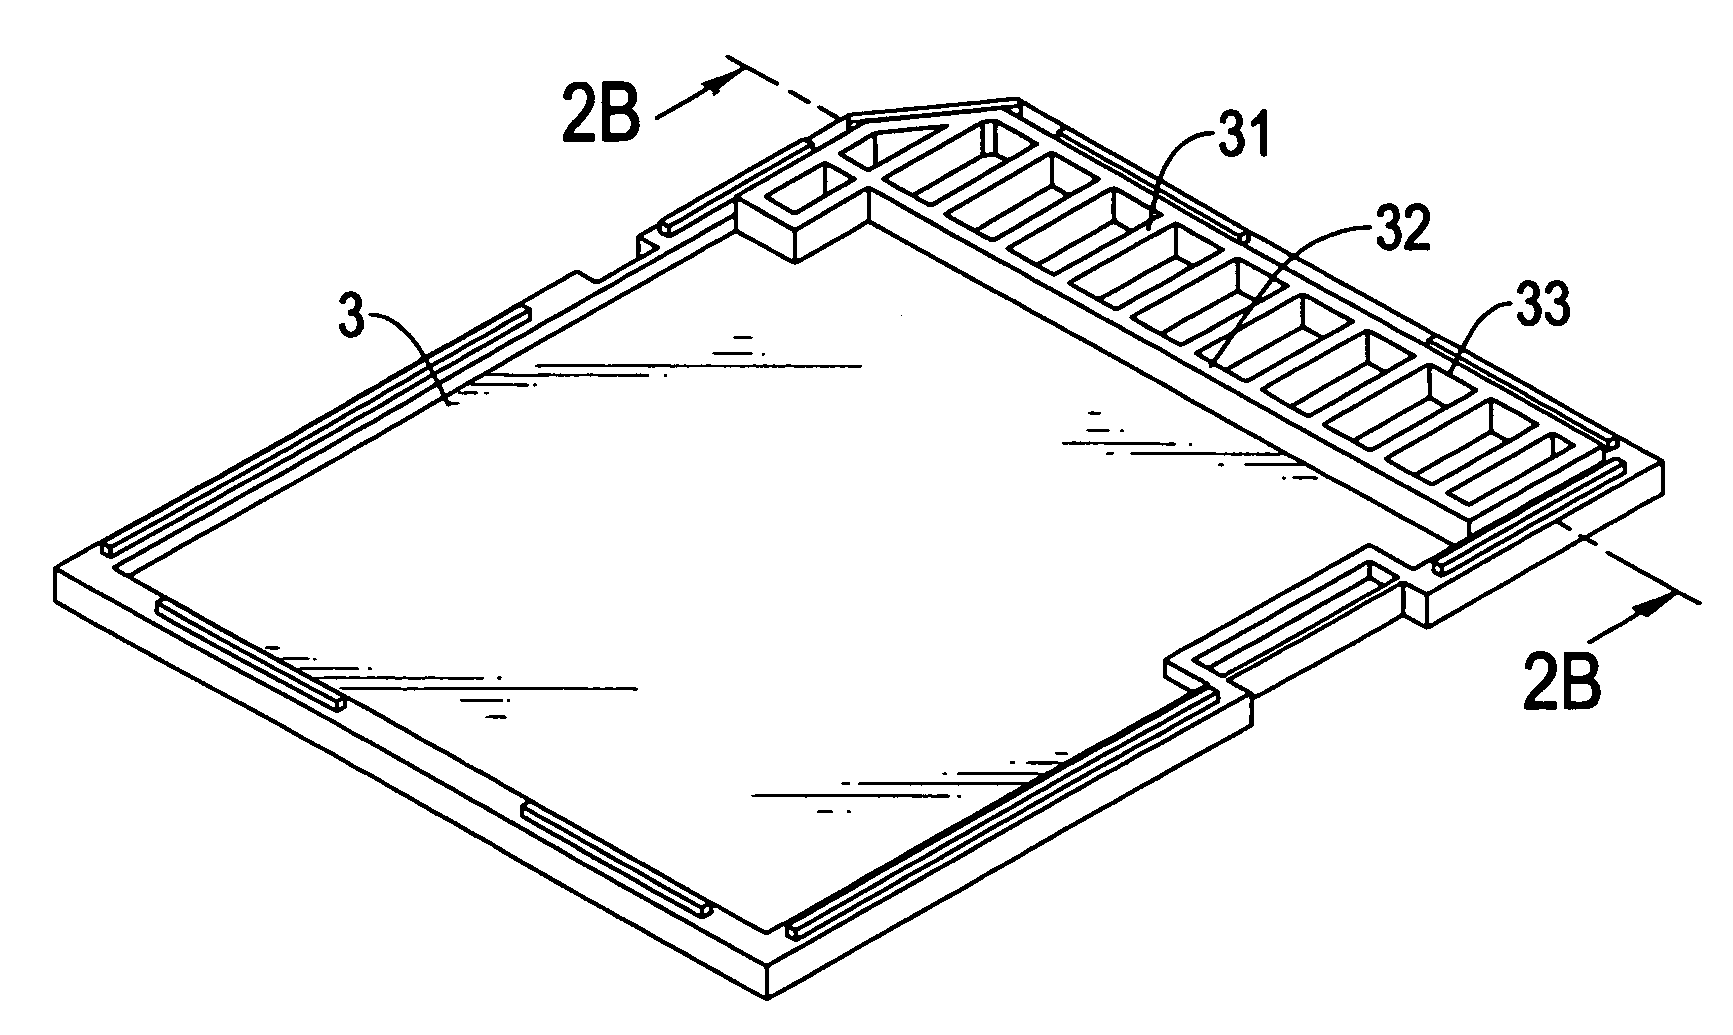 Memory card casing having longitudinally formed ridges and radially formed ribs for support of contacts of a PCB